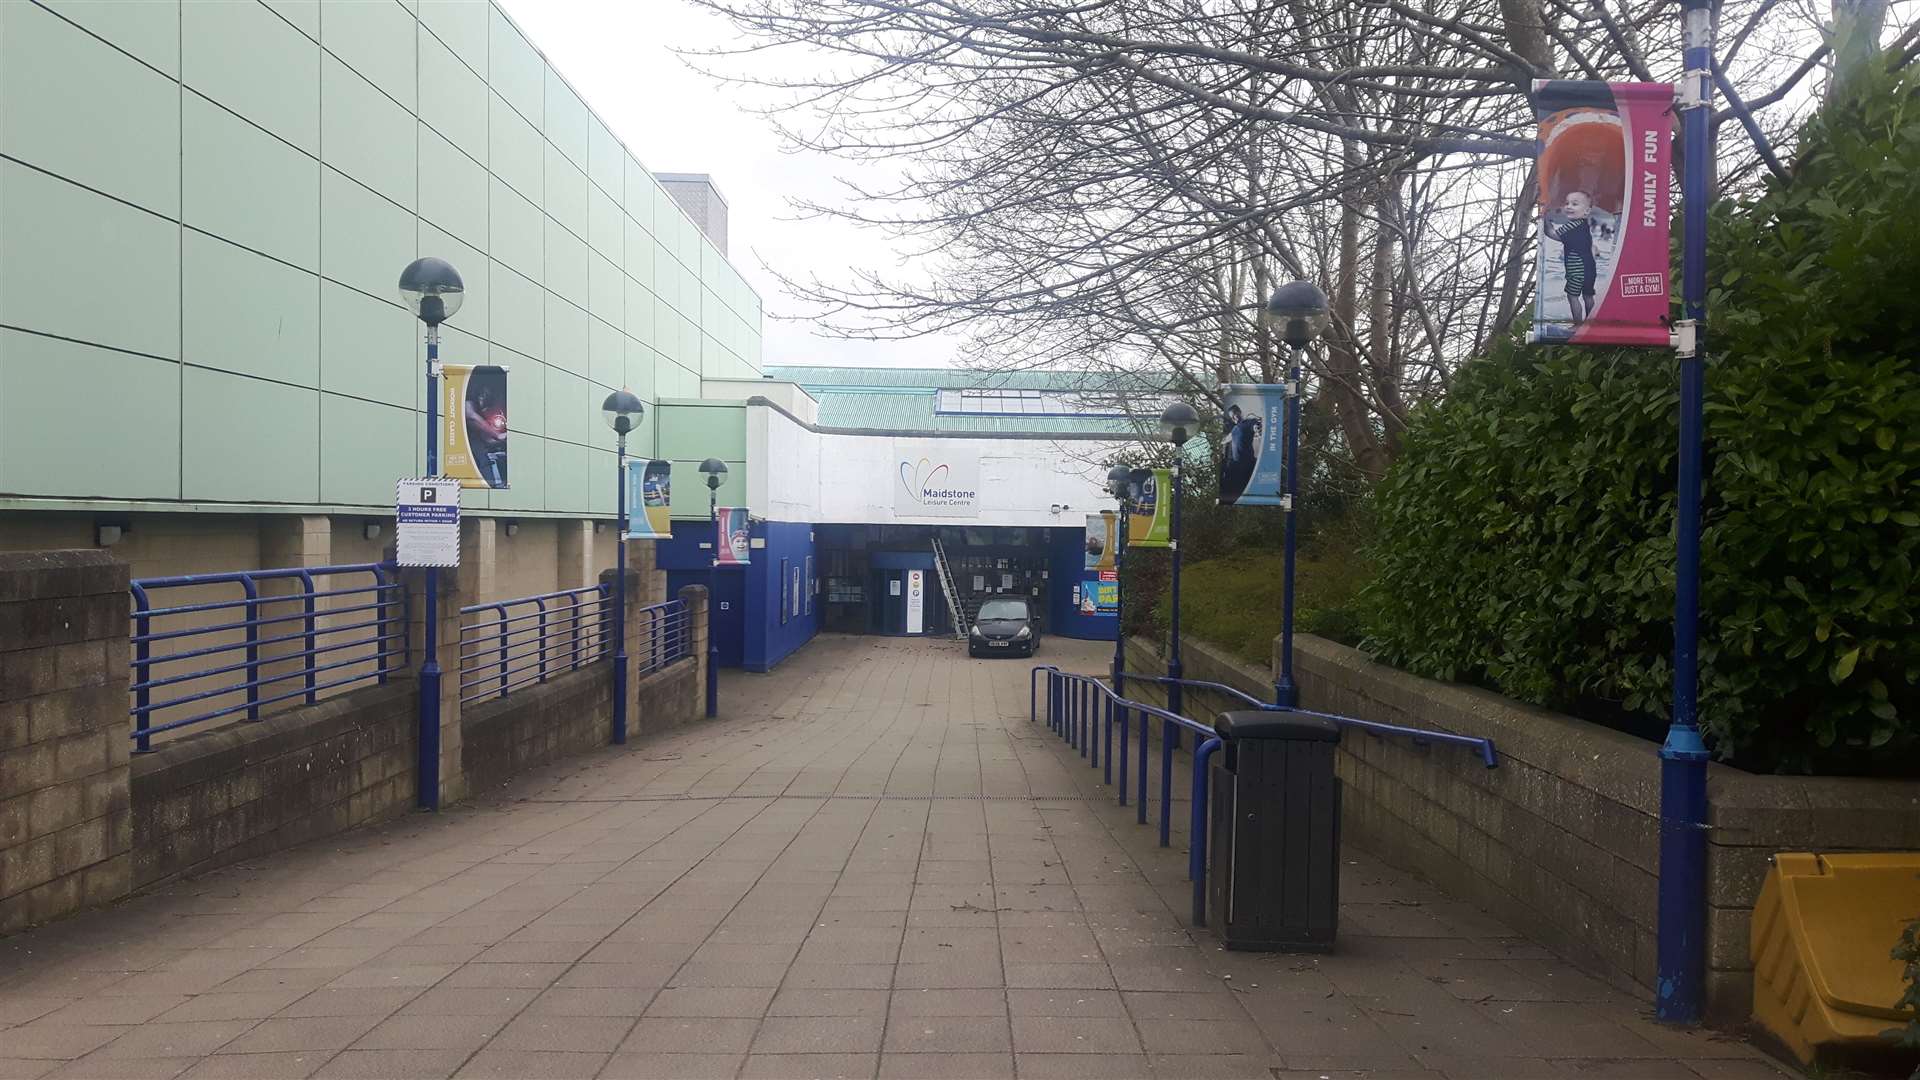 The entrance to the leisure centre at Mote Park